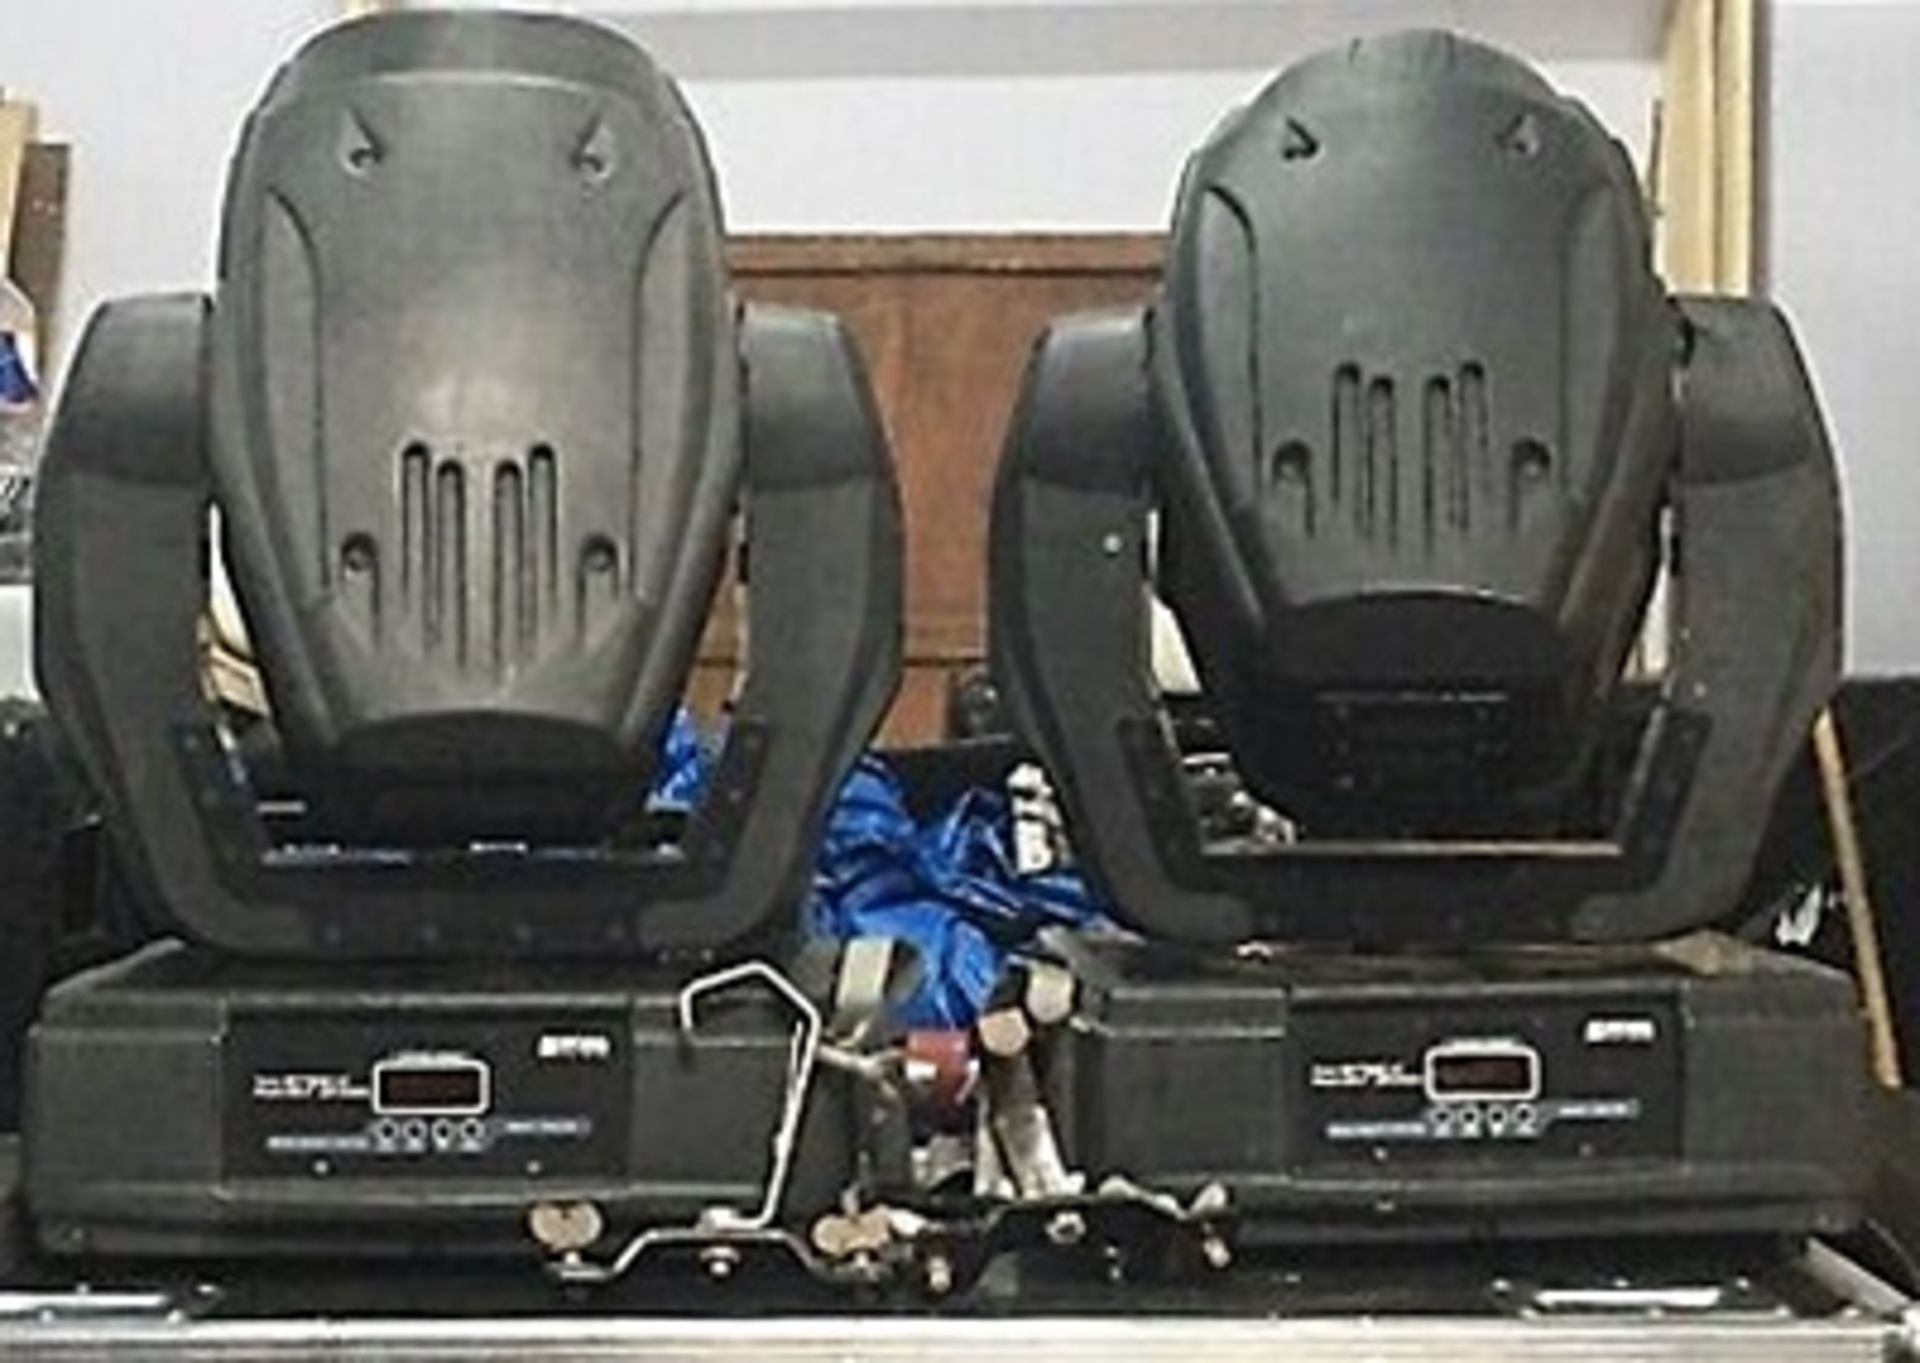 2 x Robe 575 Moving Heads With Hook Clamps & Safety Chains In Dual Flight Case - Ref: 443 -